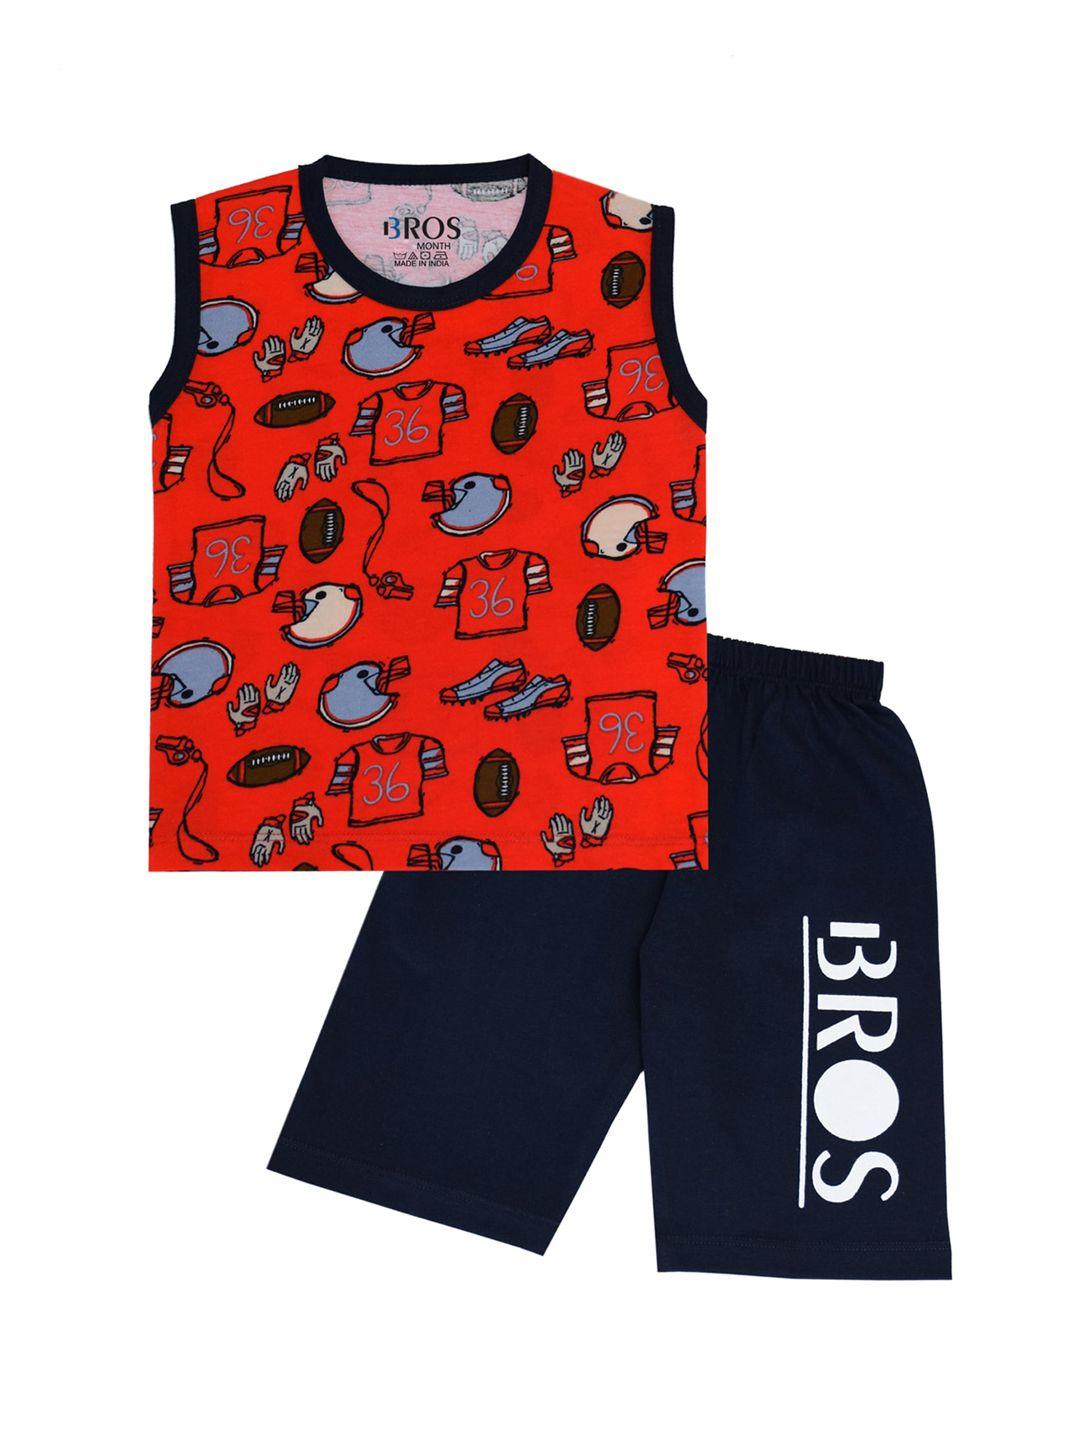 3bros unisex kids red & black printed t-shirt with shorts